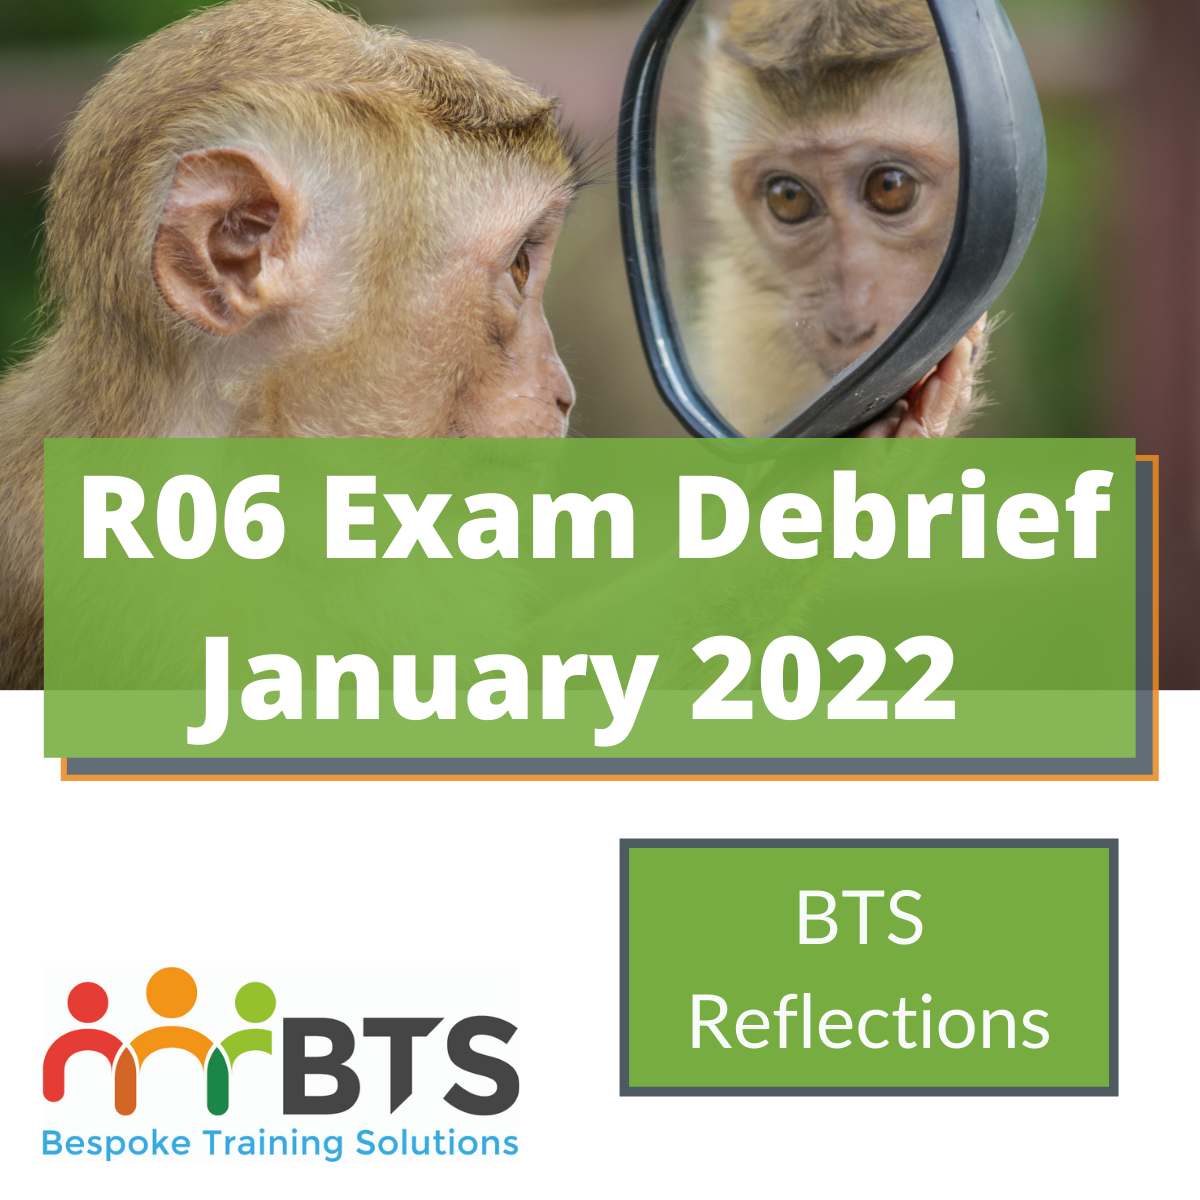 Primate looking into a car wing mirror with reflection with the words R06 exam debrief